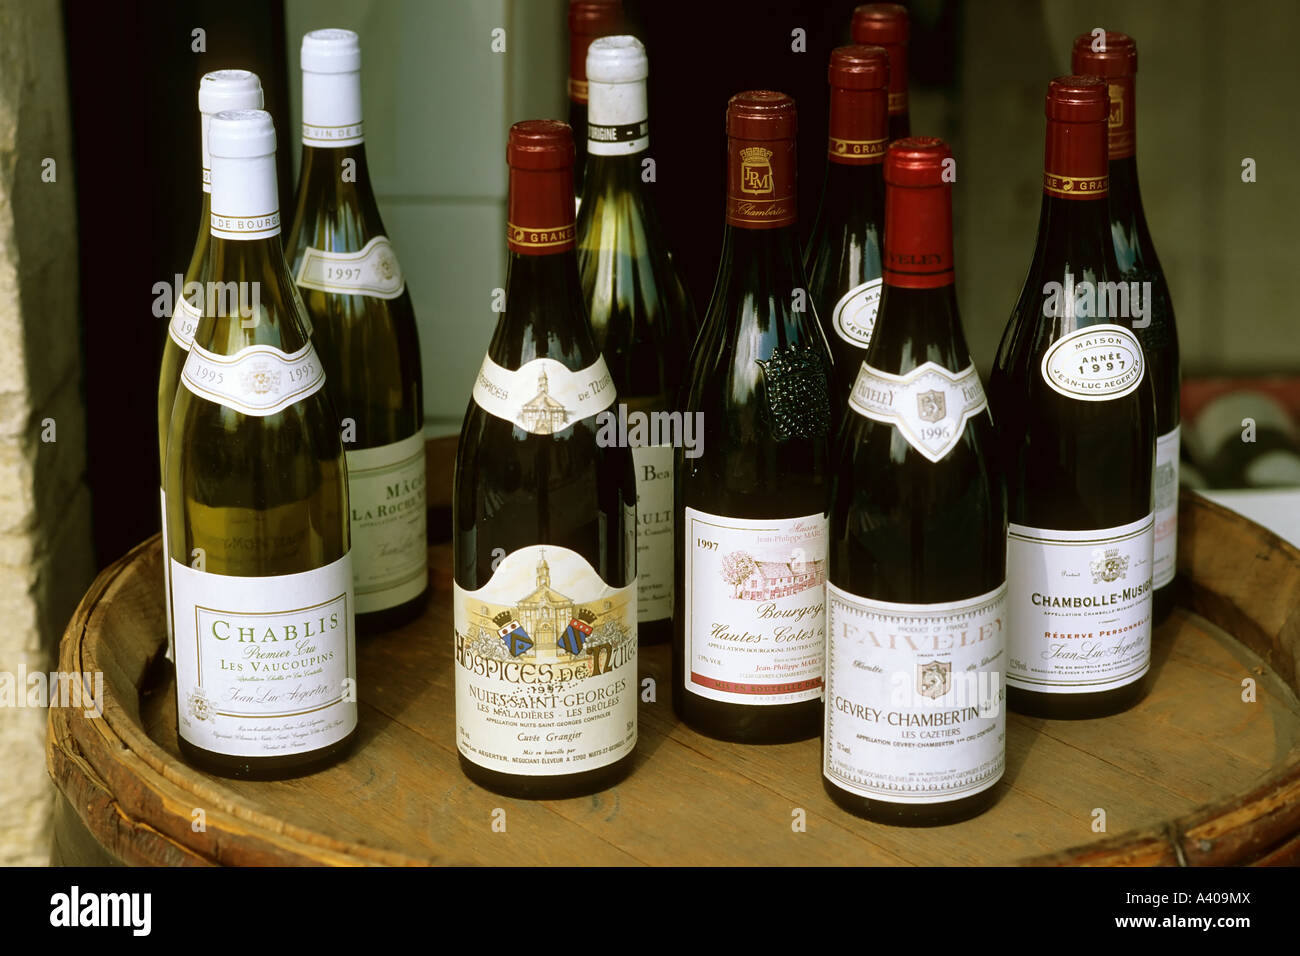 FRANCE BURGUNDY  NUITS-ST-GEORGES  SHOP DISPLAY WITH RED AND WHITE WINE BOTTLES Stock Photo